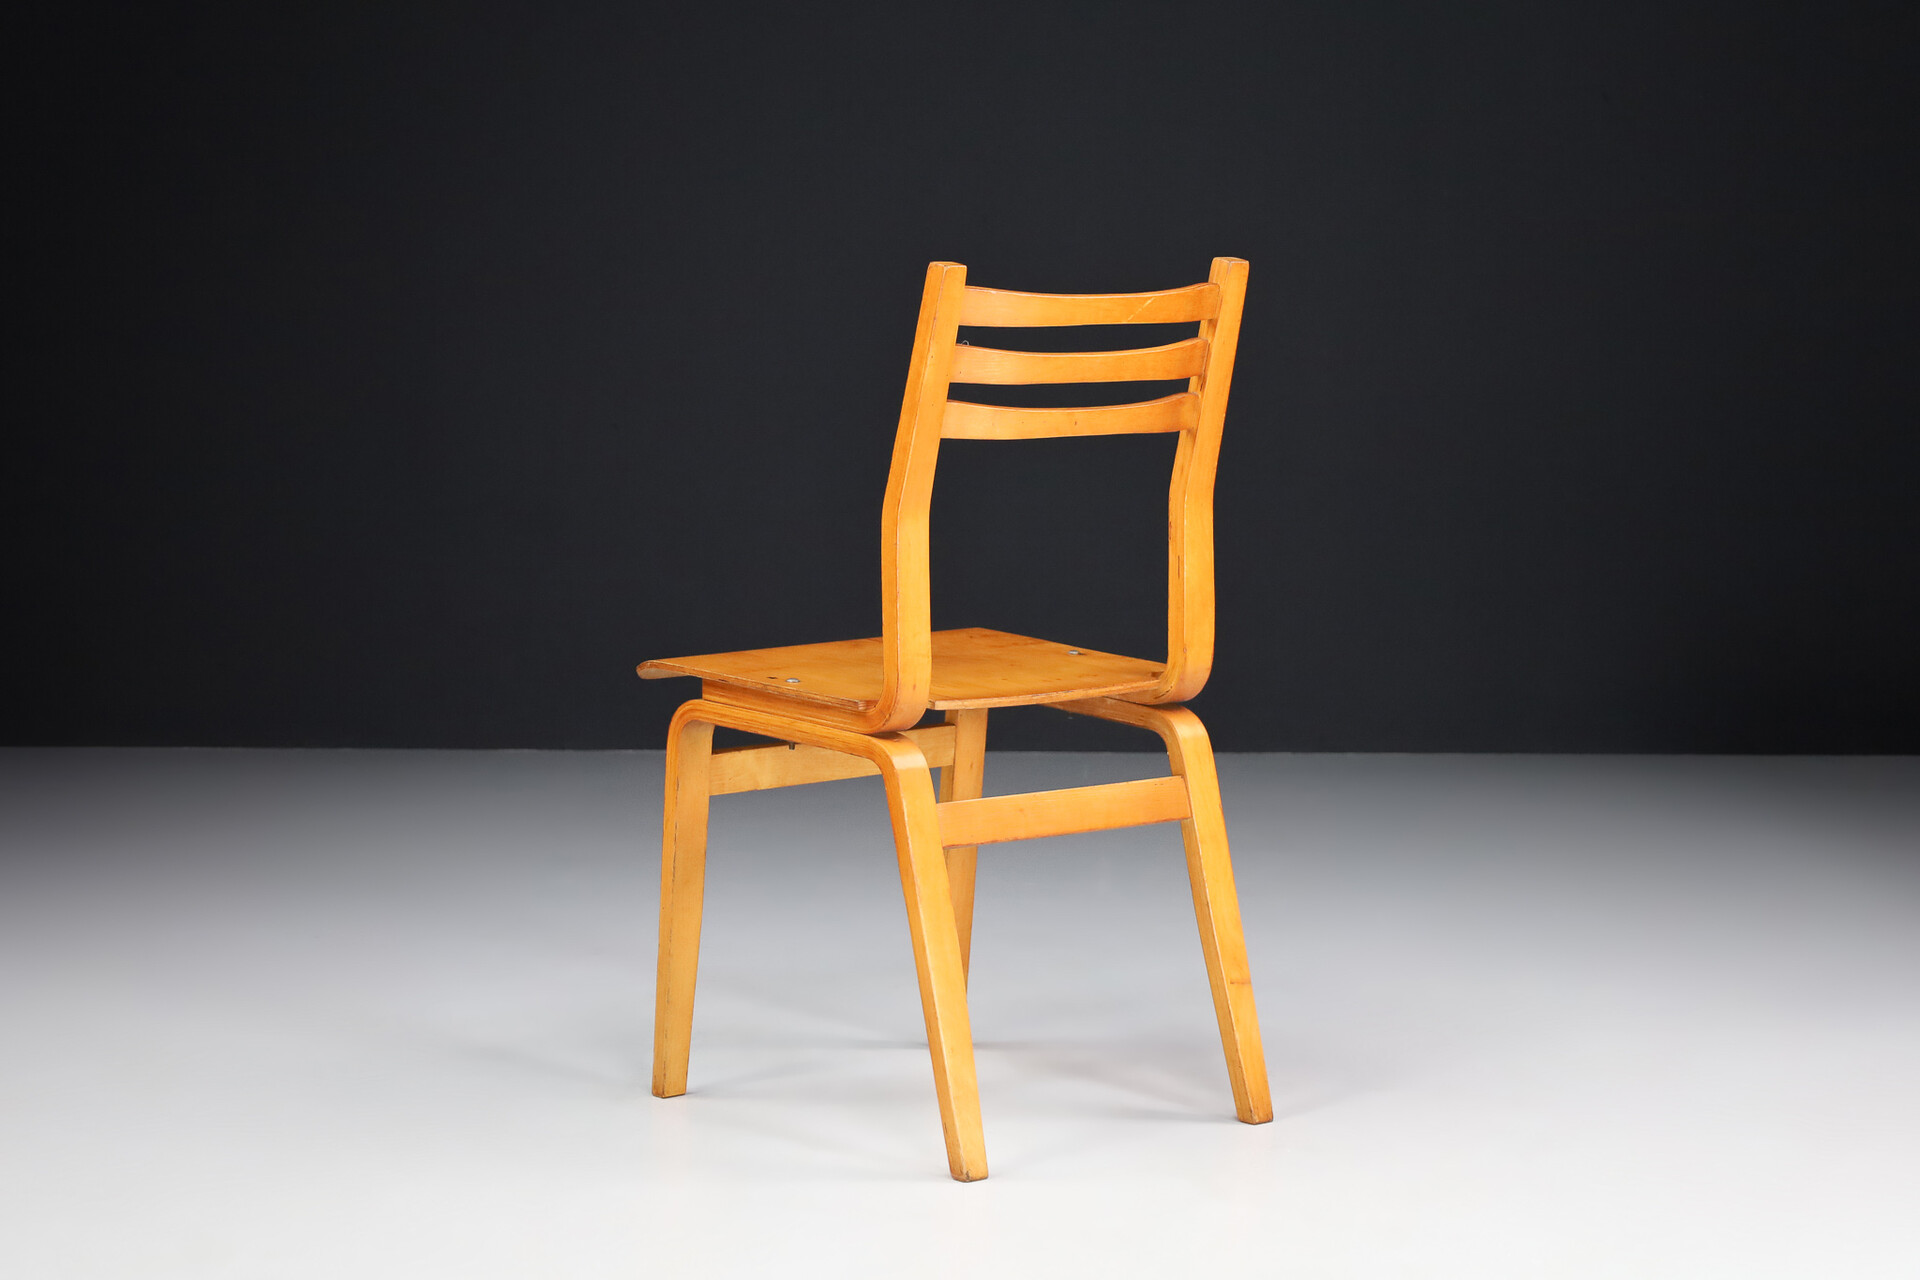 Set of 21 Plywood/Bentwood chairs, Praque 1960s Mid-20th century